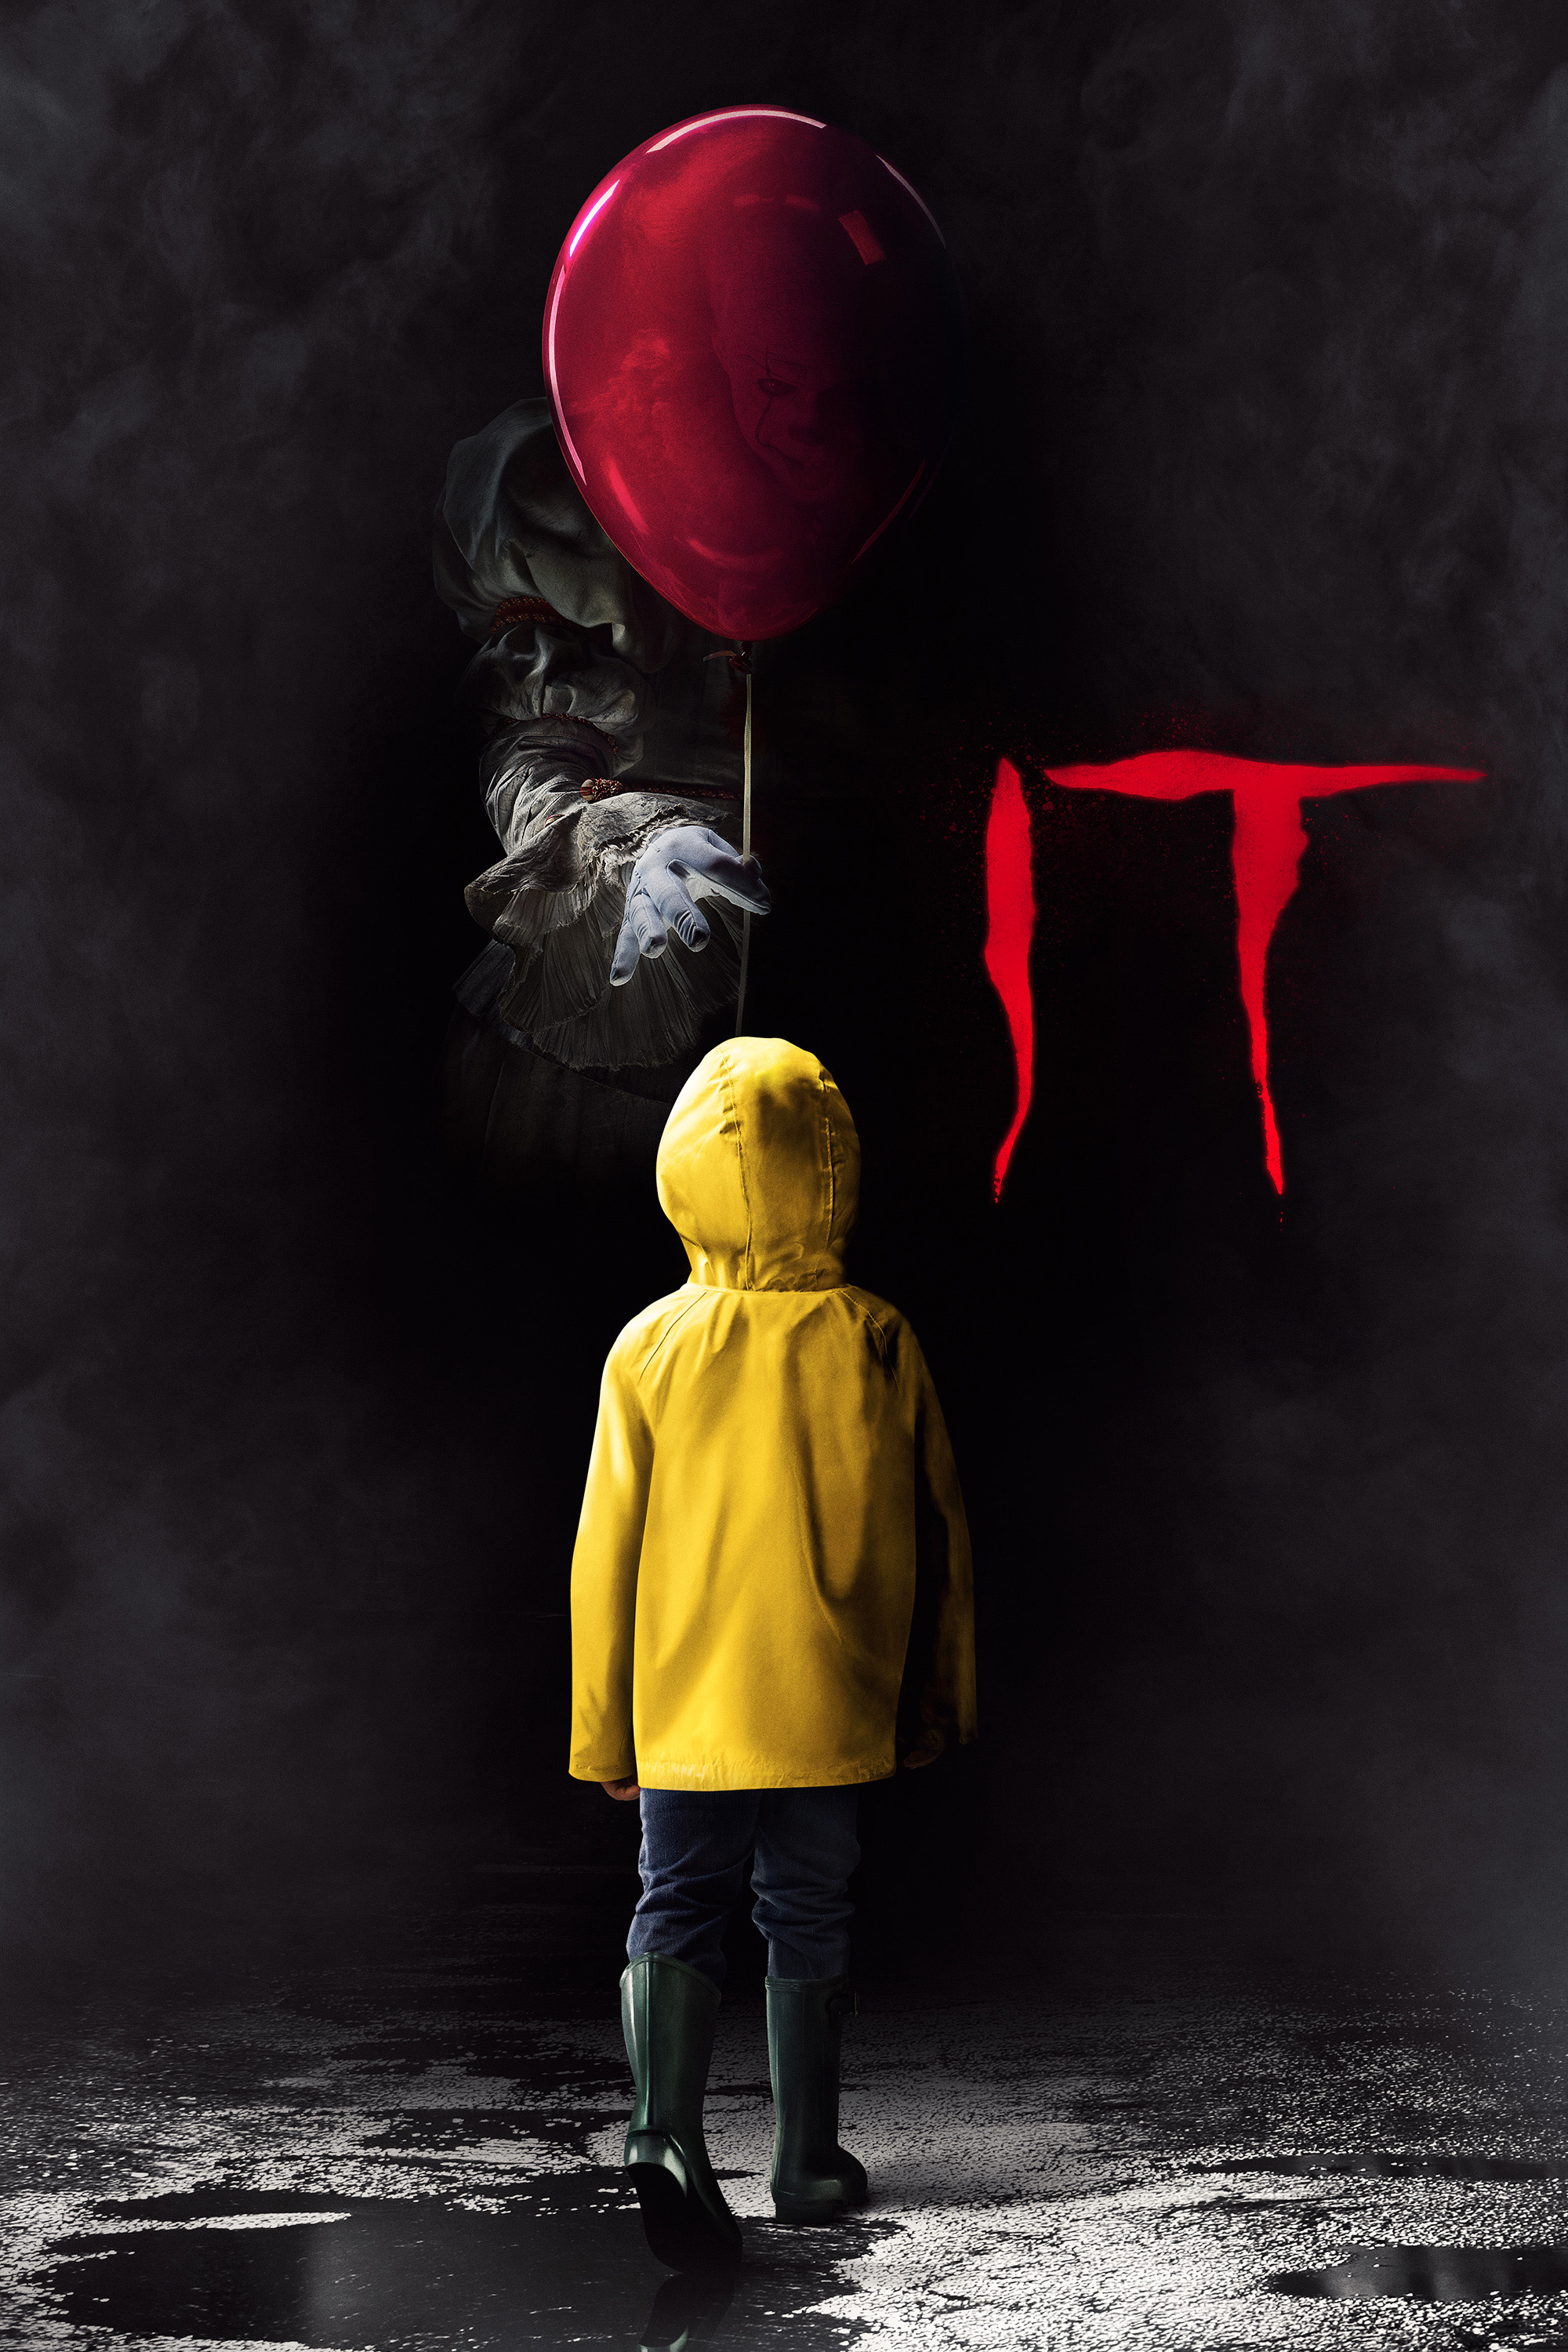 It - Scary Halloween Movies